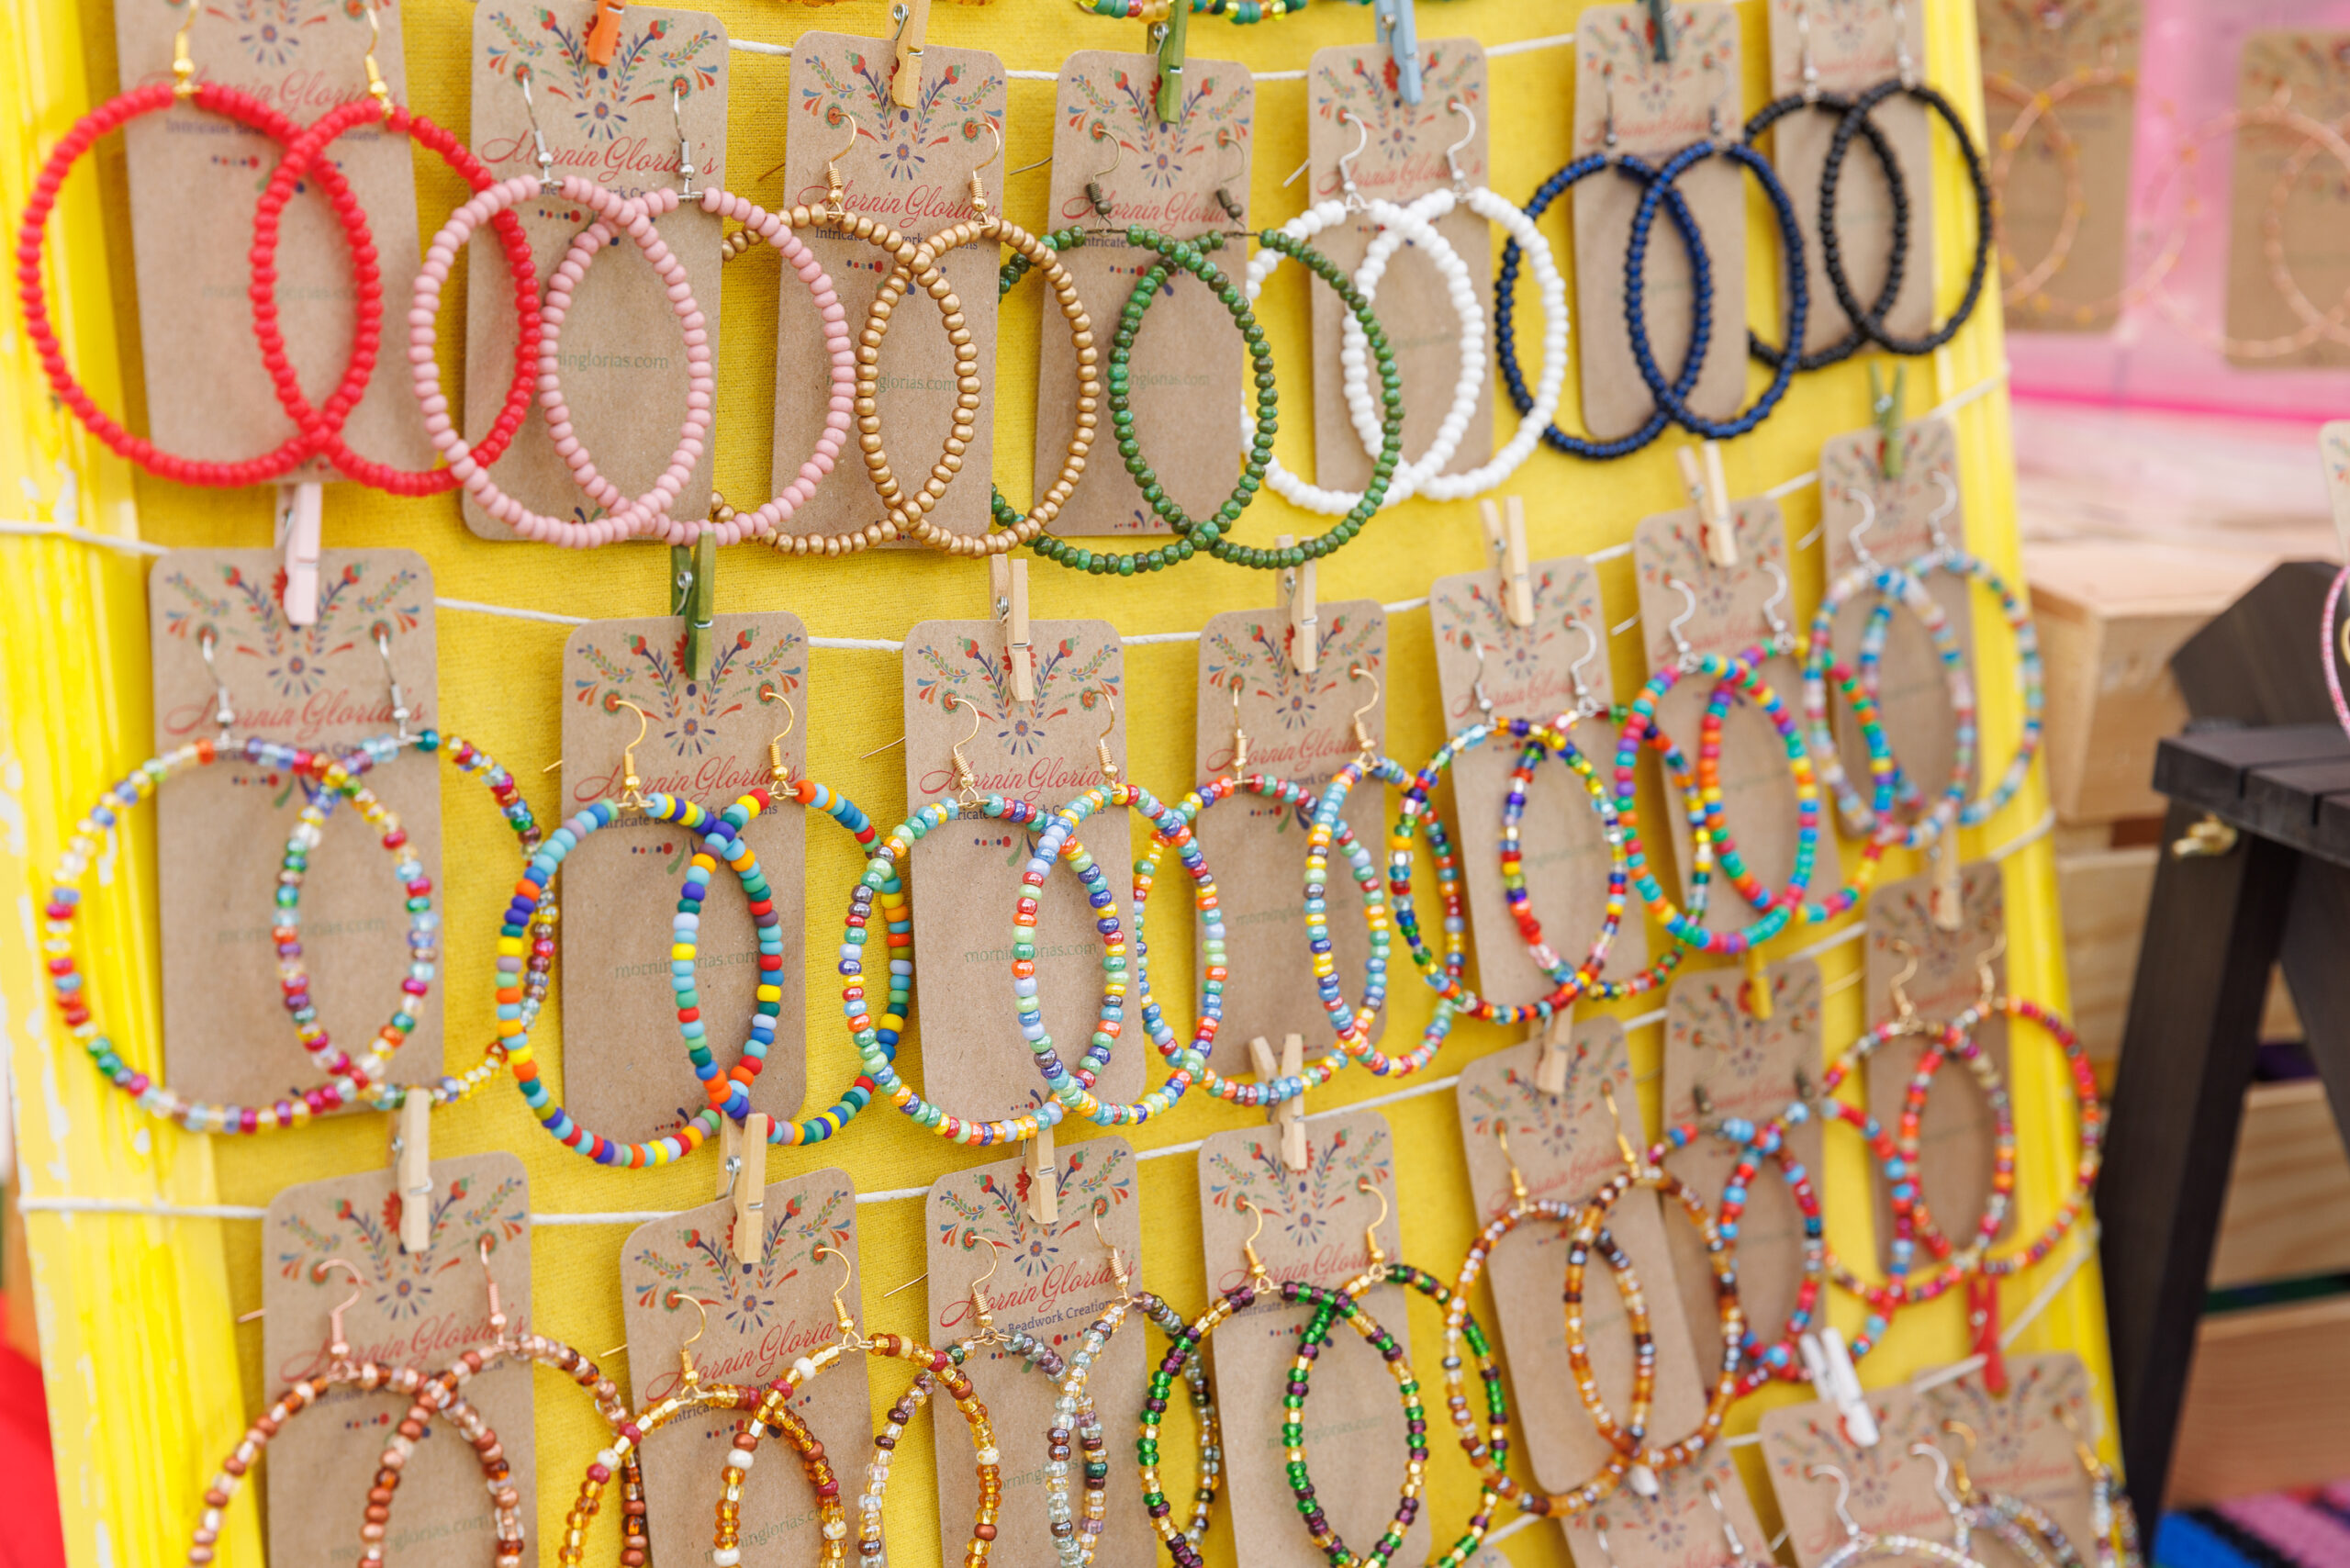 Colorful beaded hoop earrings displayed on a yellow stand with cardboard tags.